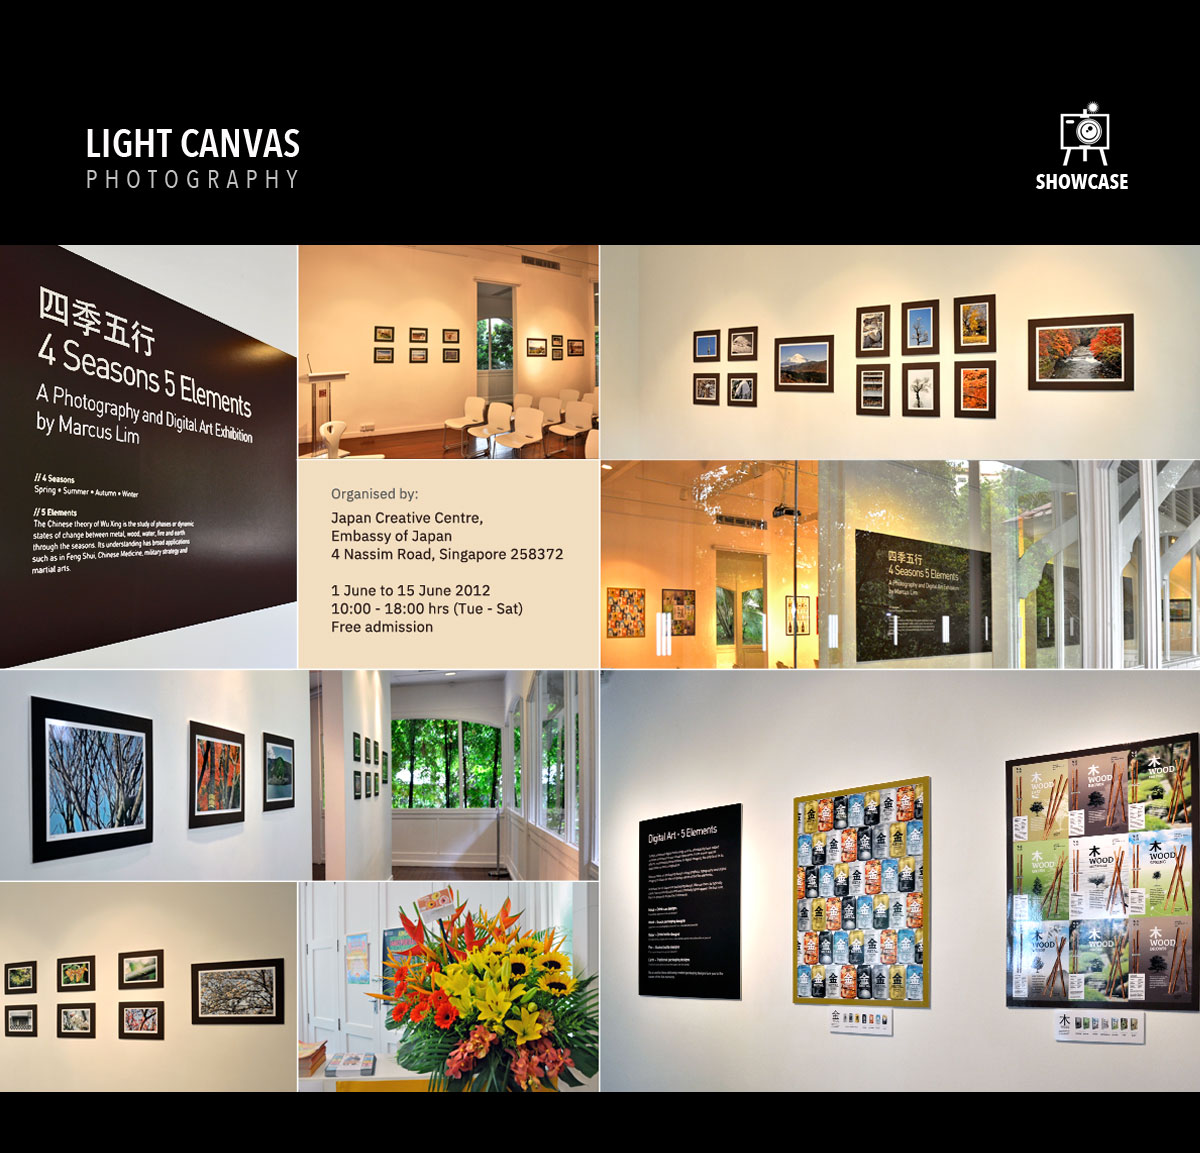 Marcus Lim, Photography and Digital Art Exhibition